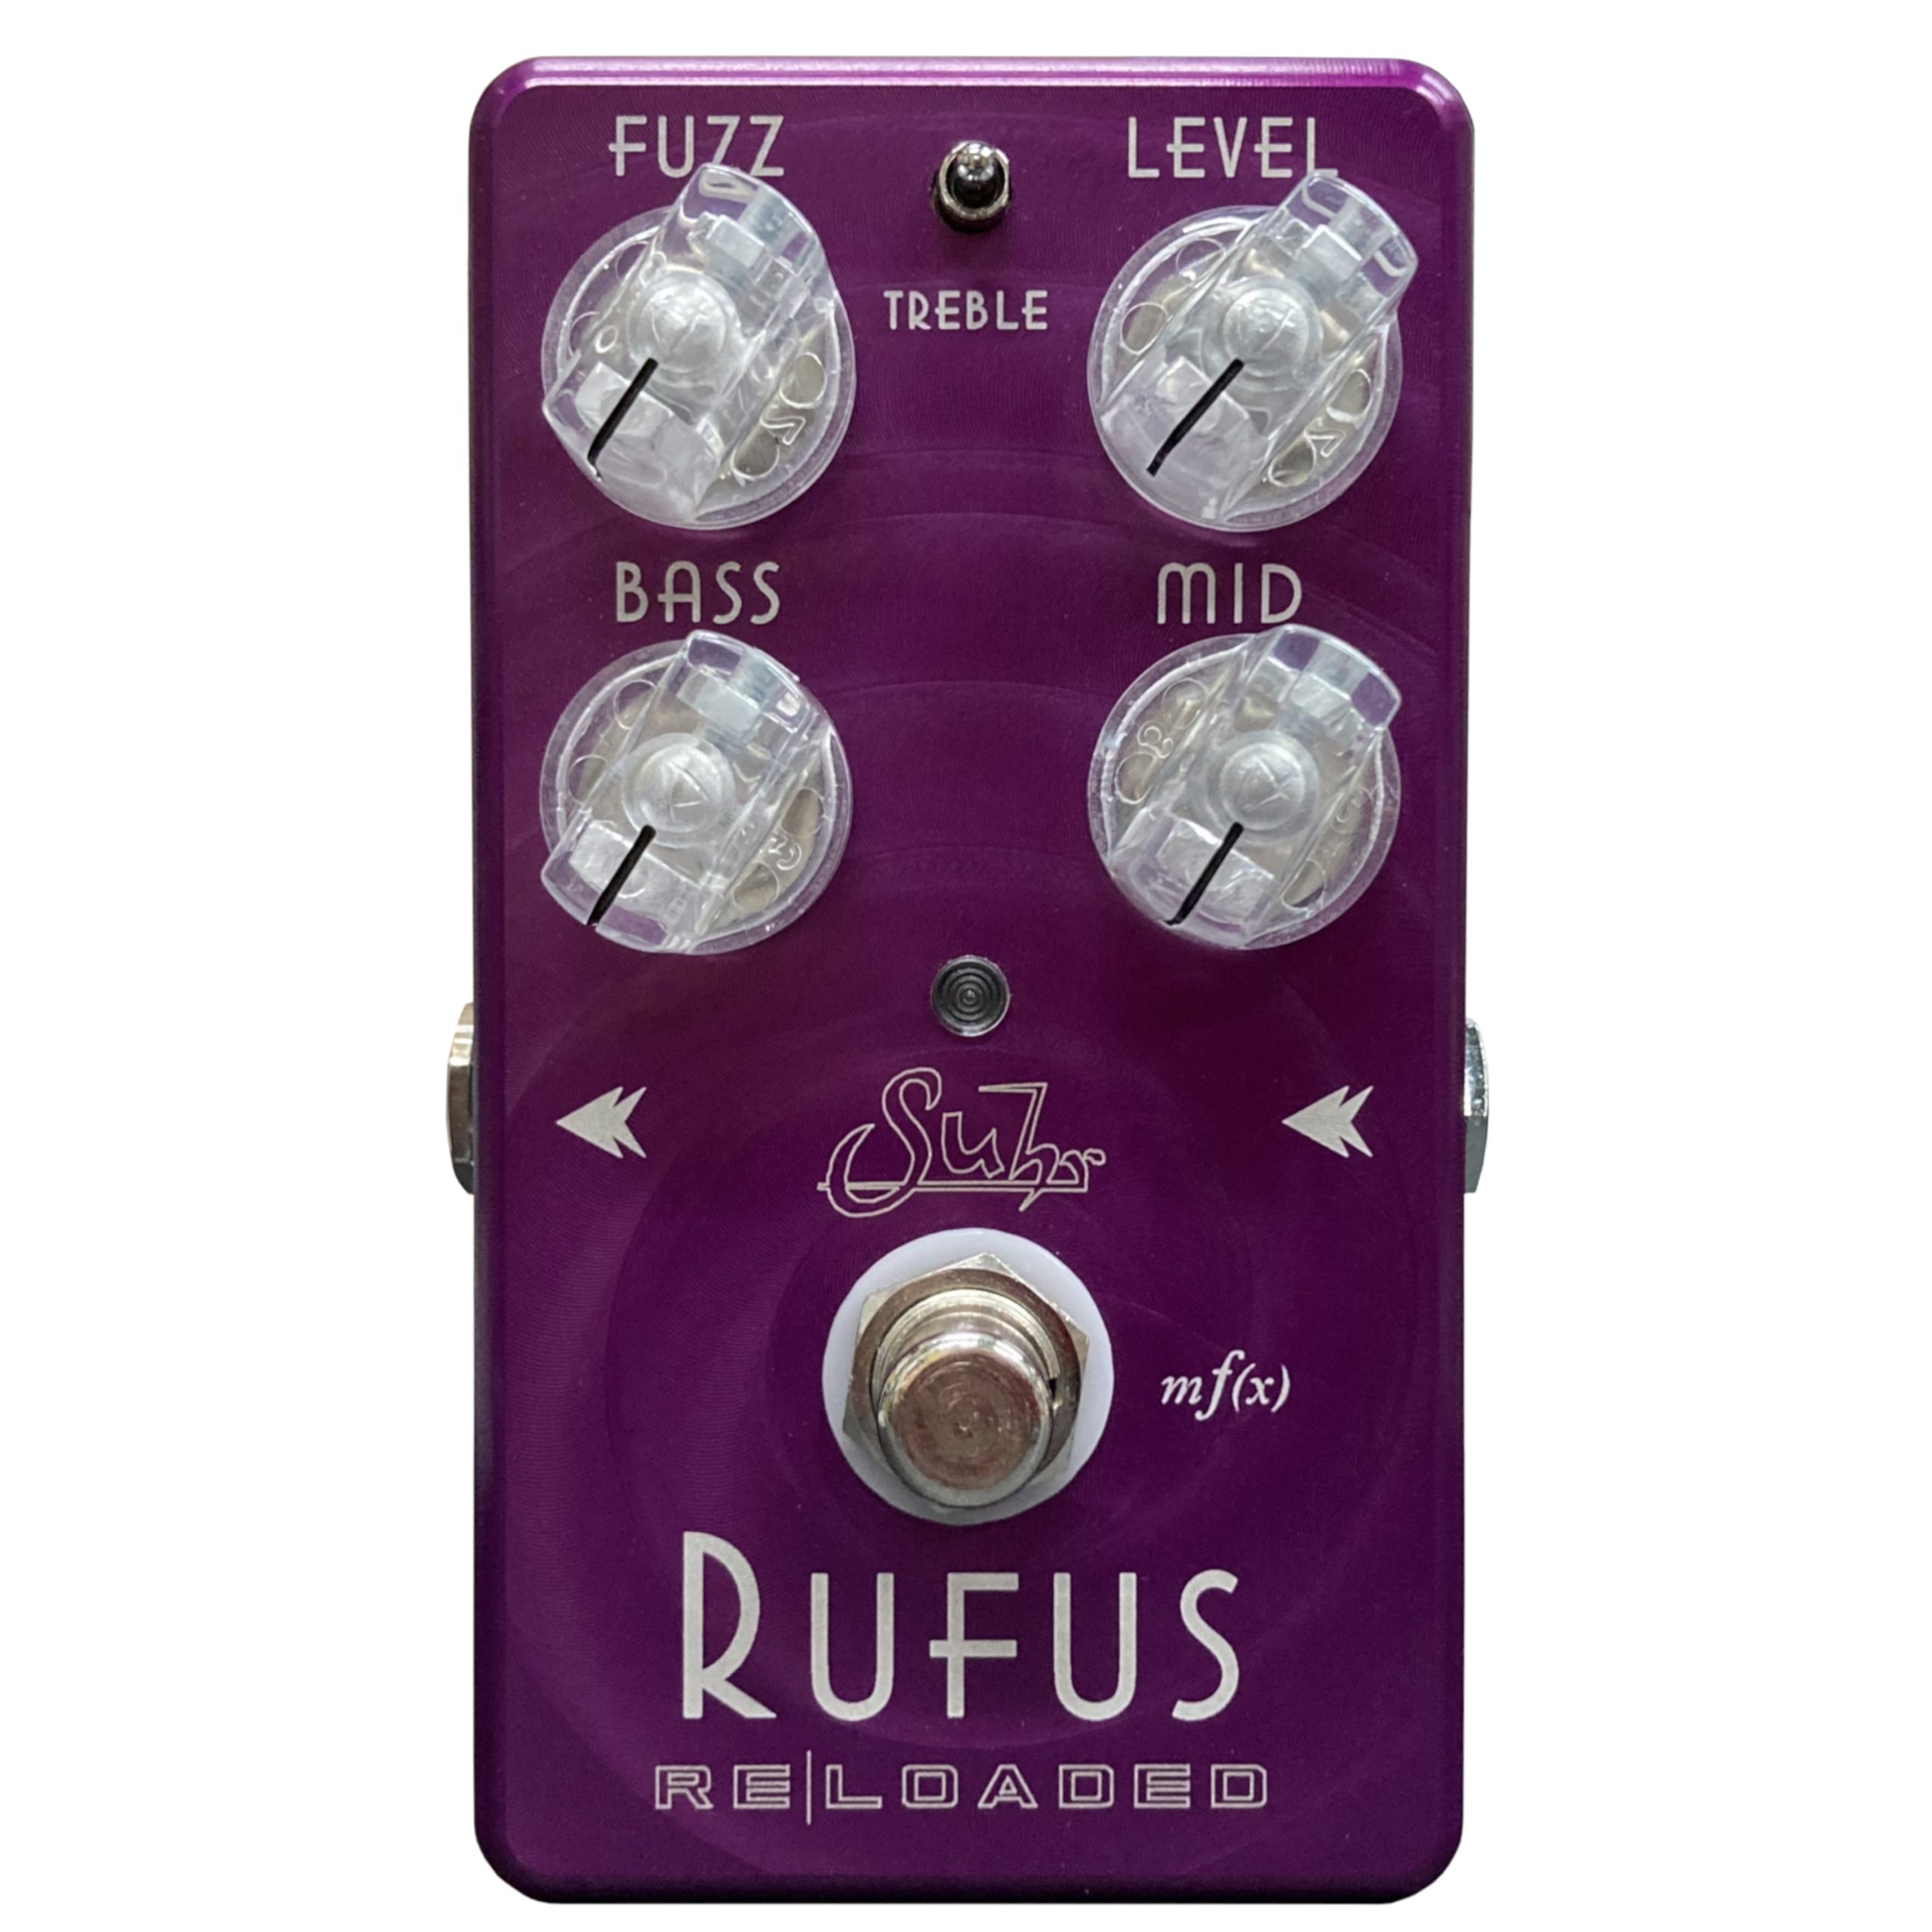 Suhr – Rufus RE|LOADED